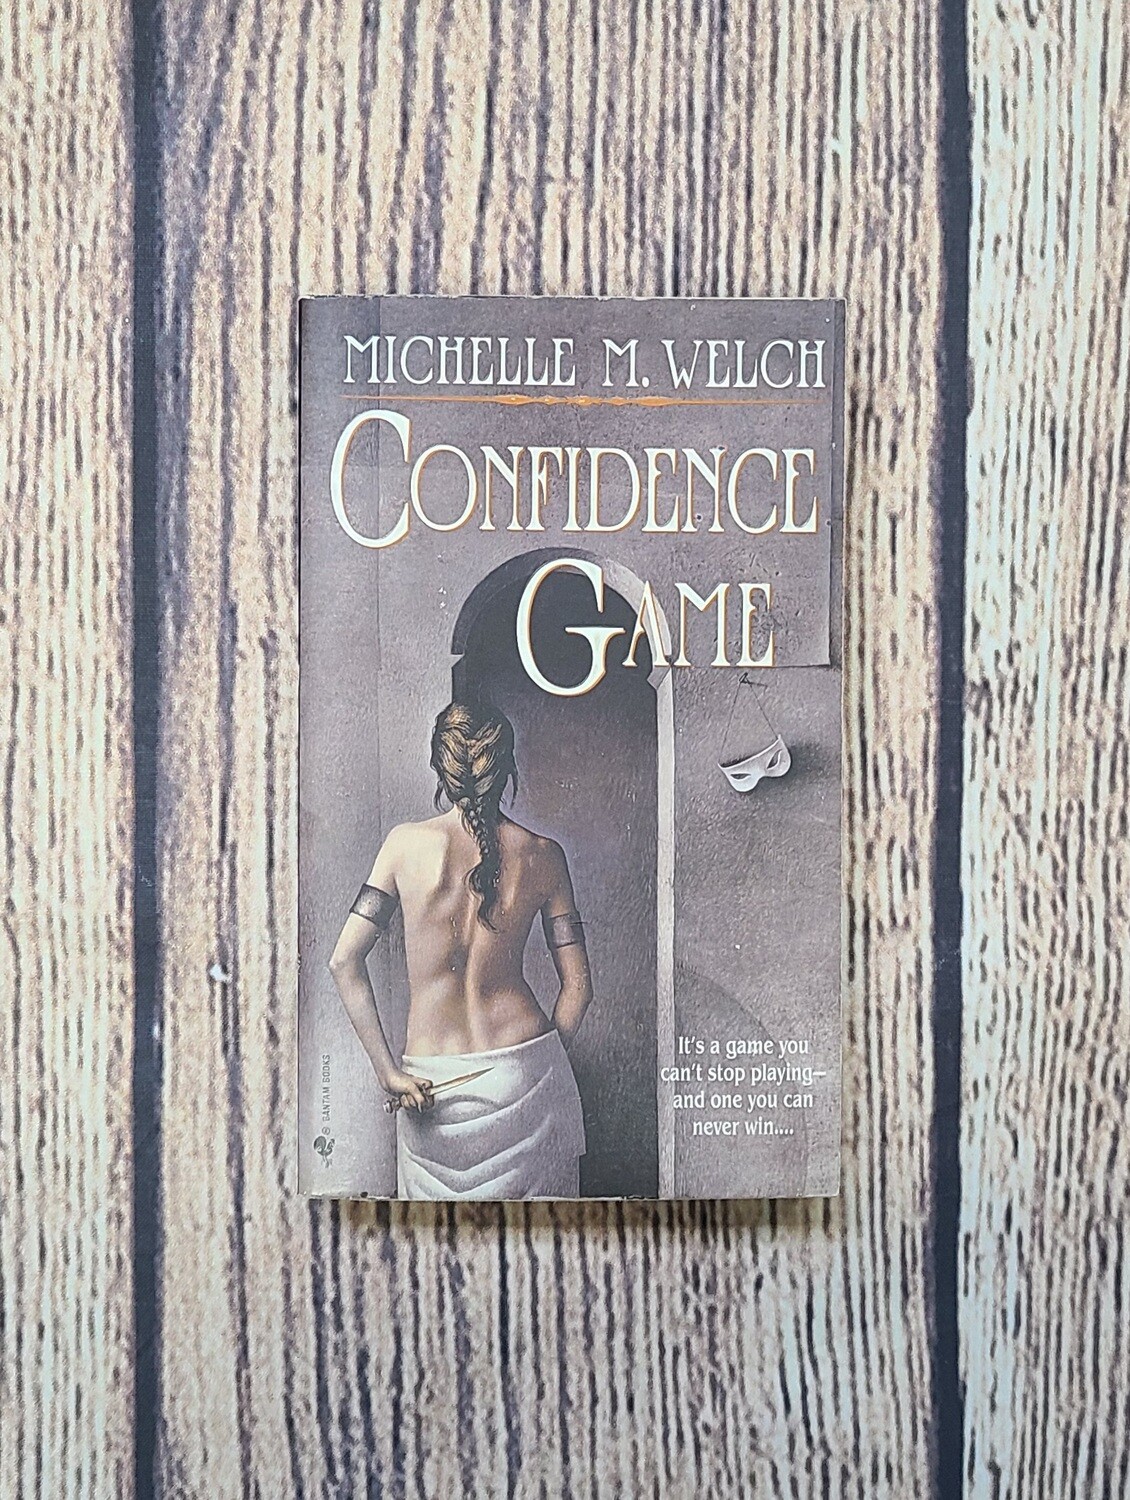 Confidence Game by Michelle M. Welch